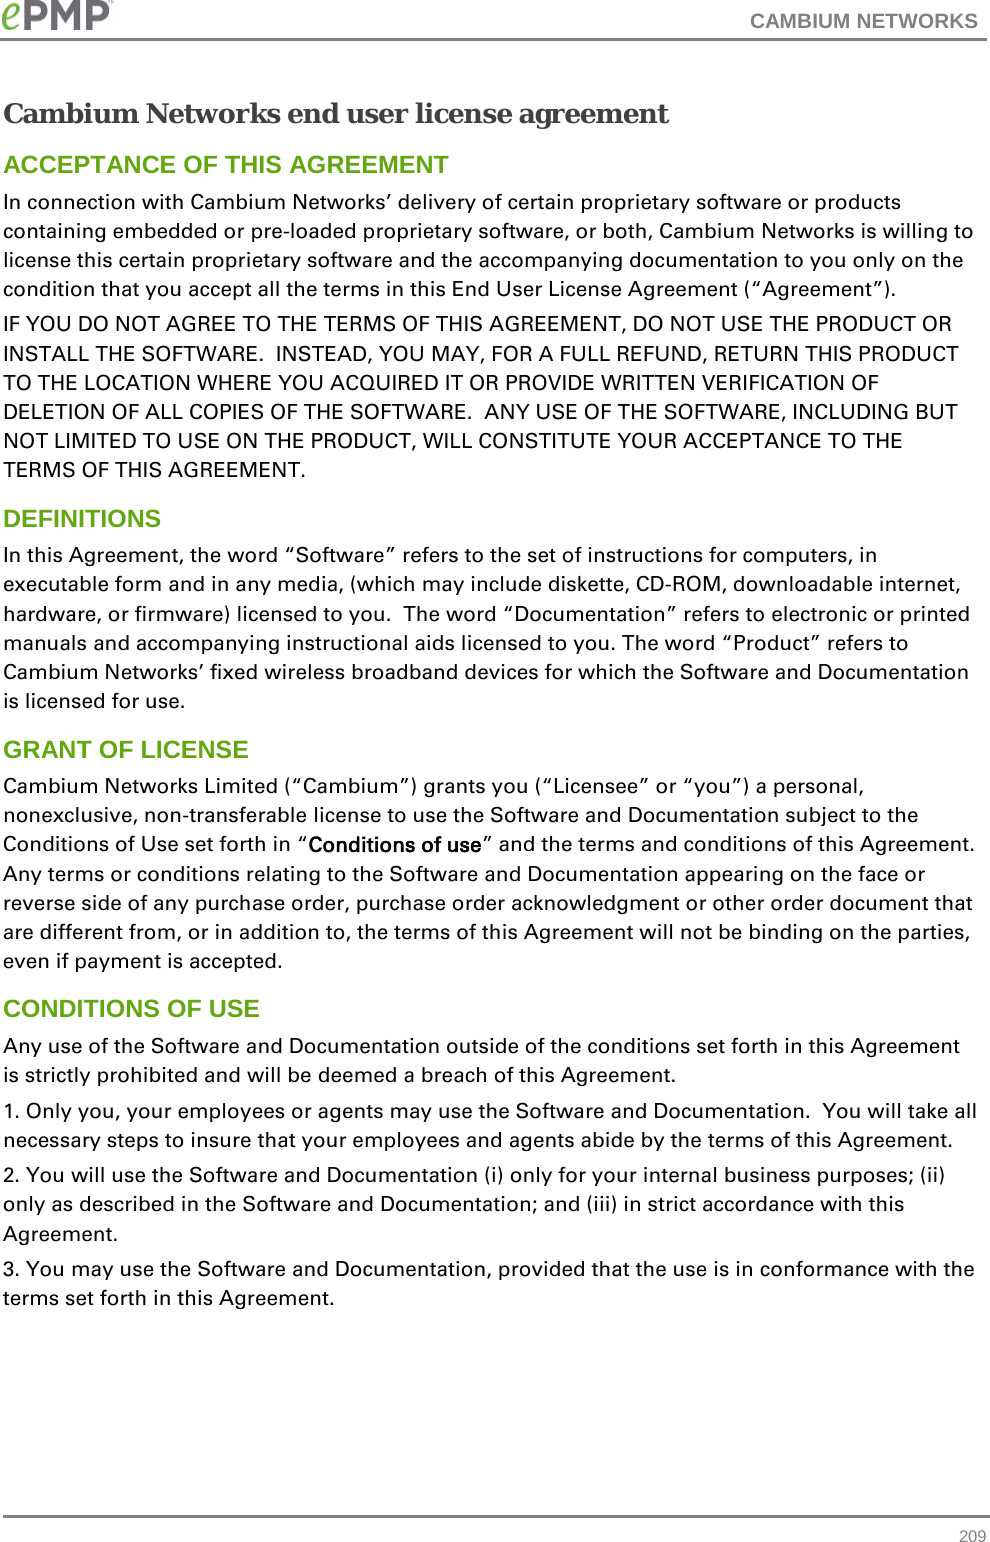 CAMBIUM NETWORKS  Cambium Networks end user license agreement ACCEPTANCE OF THIS AGREEMENT In connection with Cambium Networks’ delivery of certain proprietary software or products containing embedded or pre-loaded proprietary software, or both, Cambium Networks is willing to license this certain proprietary software and the accompanying documentation to you only on the condition that you accept all the terms in this End User License Agreement (“Agreement”). IF YOU DO NOT AGREE TO THE TERMS OF THIS AGREEMENT, DO NOT USE THE PRODUCT OR INSTALL THE SOFTWARE.  INSTEAD, YOU MAY, FOR A FULL REFUND, RETURN THIS PRODUCT TO THE LOCATION WHERE YOU ACQUIRED IT OR PROVIDE WRITTEN VERIFICATION OF DELETION OF ALL COPIES OF THE SOFTWARE.  ANY USE OF THE SOFTWARE, INCLUDING BUT NOT LIMITED TO USE ON THE PRODUCT, WILL CONSTITUTE YOUR ACCEPTANCE TO THE TERMS OF THIS AGREEMENT.  DEFINITIONS In this Agreement, the word “Software” refers to the set of instructions for computers, in executable form and in any media, (which may include diskette, CD-ROM, downloadable internet, hardware, or firmware) licensed to you.  The word “Documentation” refers to electronic or printed manuals and accompanying instructional aids licensed to you. The word “Product” refers to Cambium Networks’ fixed wireless broadband devices for which the Software and Documentation is licensed for use. GRANT OF LICENSE Cambium Networks Limited (“Cambium”) grants you (“Licensee” or “you”) a personal, nonexclusive, non-transferable license to use the Software and Documentation subject to the Conditions of Use set forth in “Conditions of use” and the terms and conditions of this Agreement.  Any terms or conditions relating to the Software and Documentation appearing on the face or reverse side of any purchase order, purchase order acknowledgment or other order document that are different from, or in addition to, the terms of this Agreement will not be binding on the parties, even if payment is accepted. CONDITIONS OF USE Any use of the Software and Documentation outside of the conditions set forth in this Agreement is strictly prohibited and will be deemed a breach of this Agreement.  1. Only you, your employees or agents may use the Software and Documentation.  You will take all necessary steps to insure that your employees and agents abide by the terms of this Agreement. 2. You will use the Software and Documentation (i) only for your internal business purposes; (ii) only as described in the Software and Documentation; and (iii) in strict accordance with this Agreement. 3. You may use the Software and Documentation, provided that the use is in conformance with the terms set forth in this Agreement.     209 